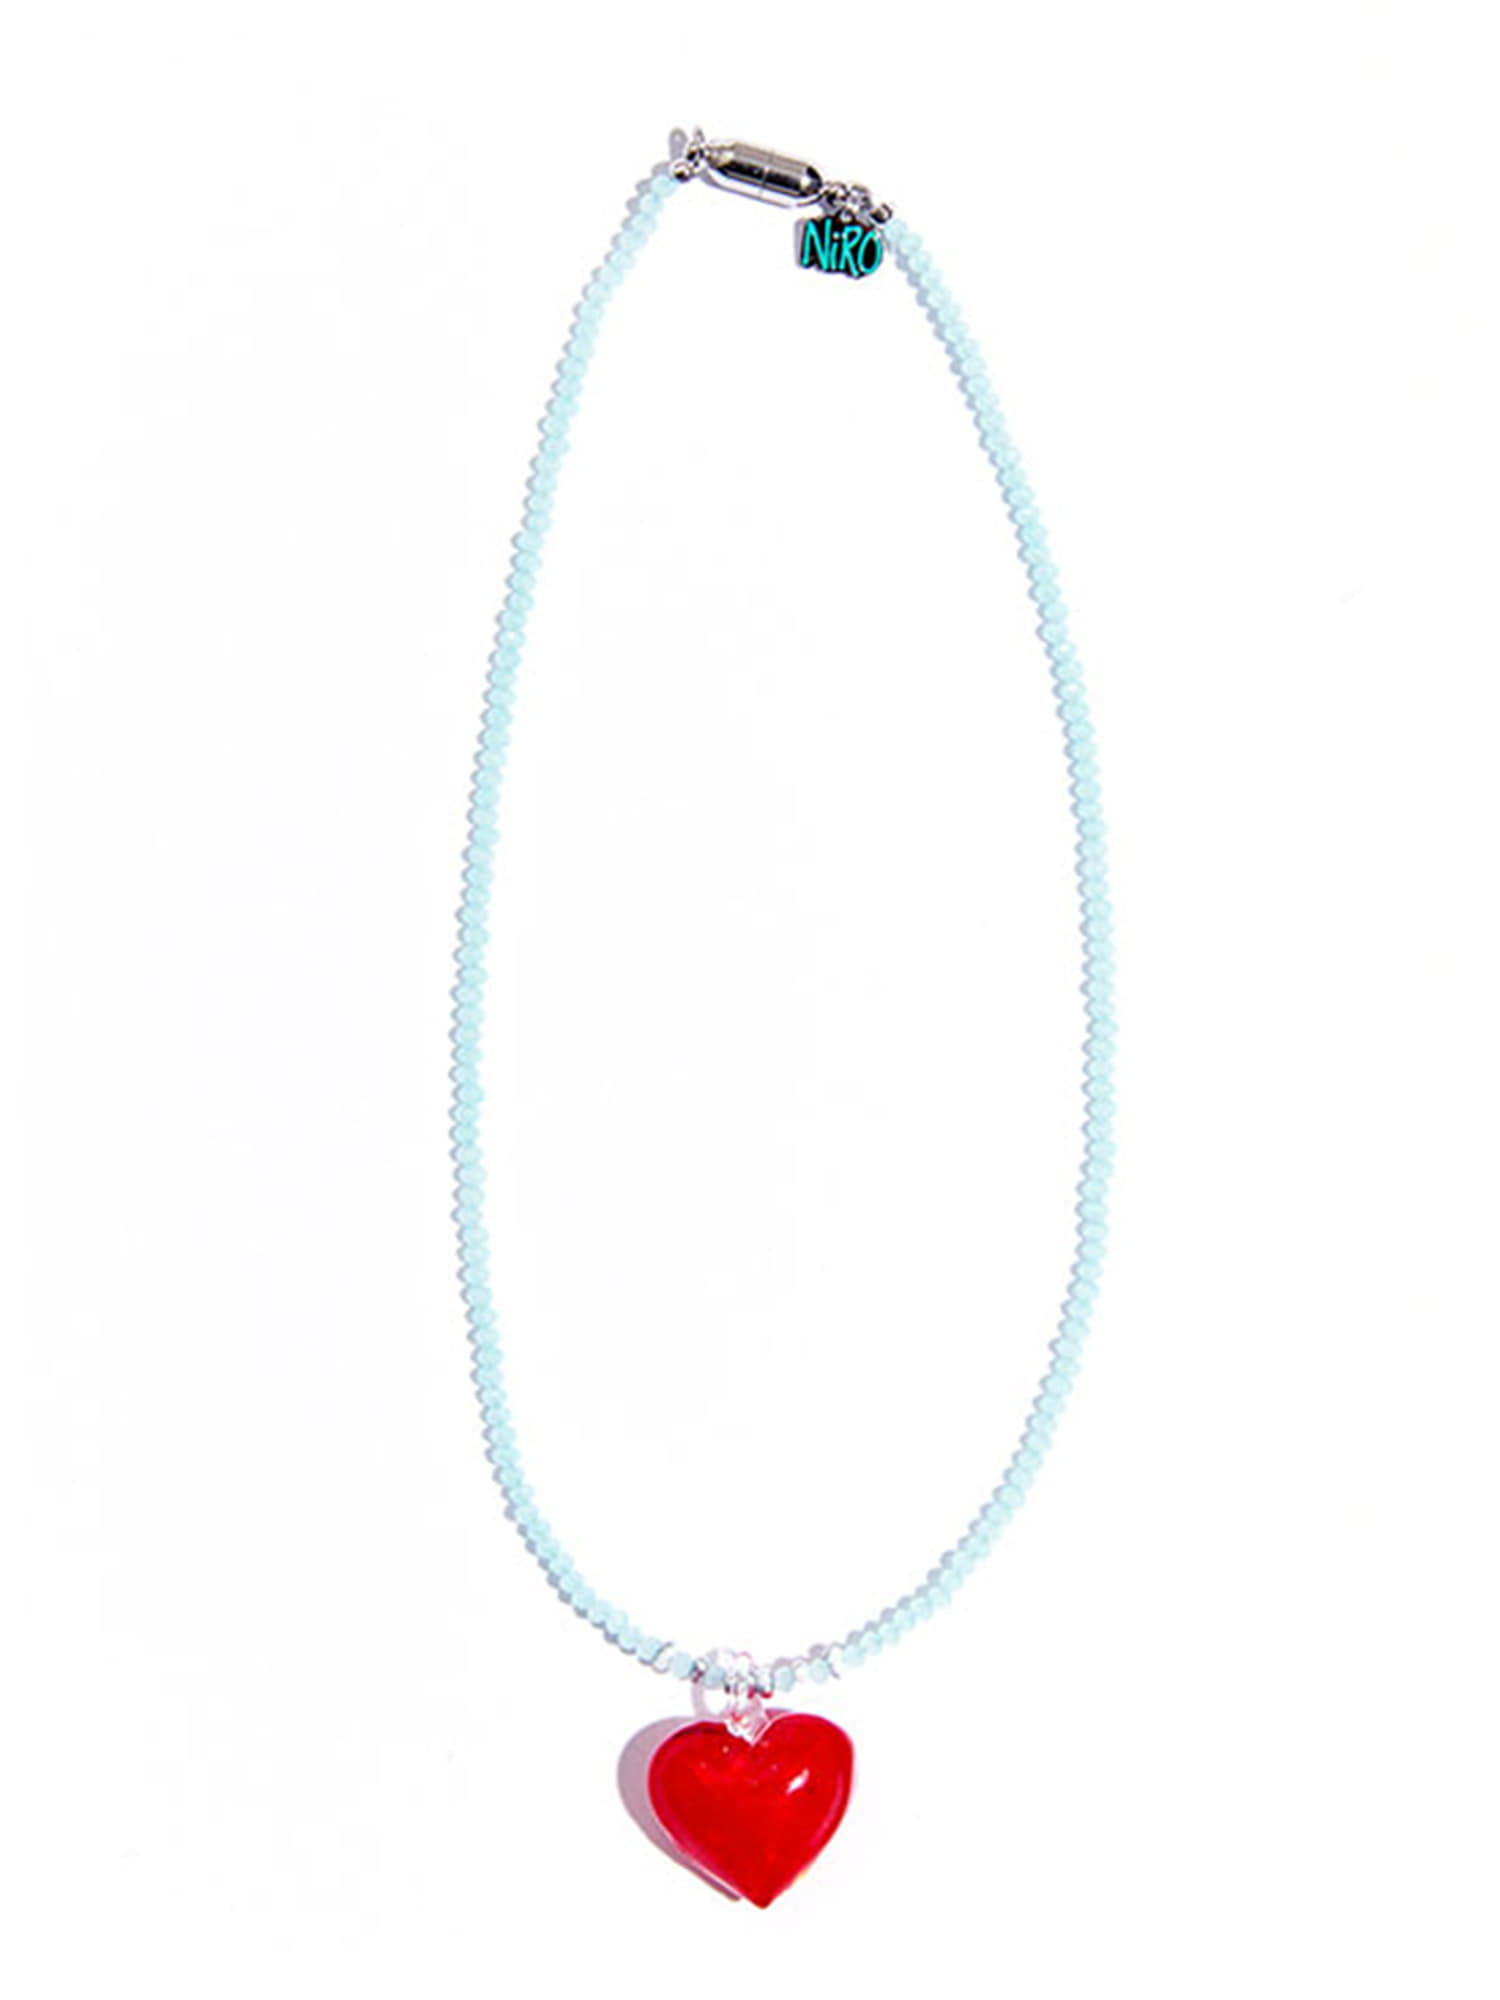 Red Heart Skyblue Beads Necklace #87